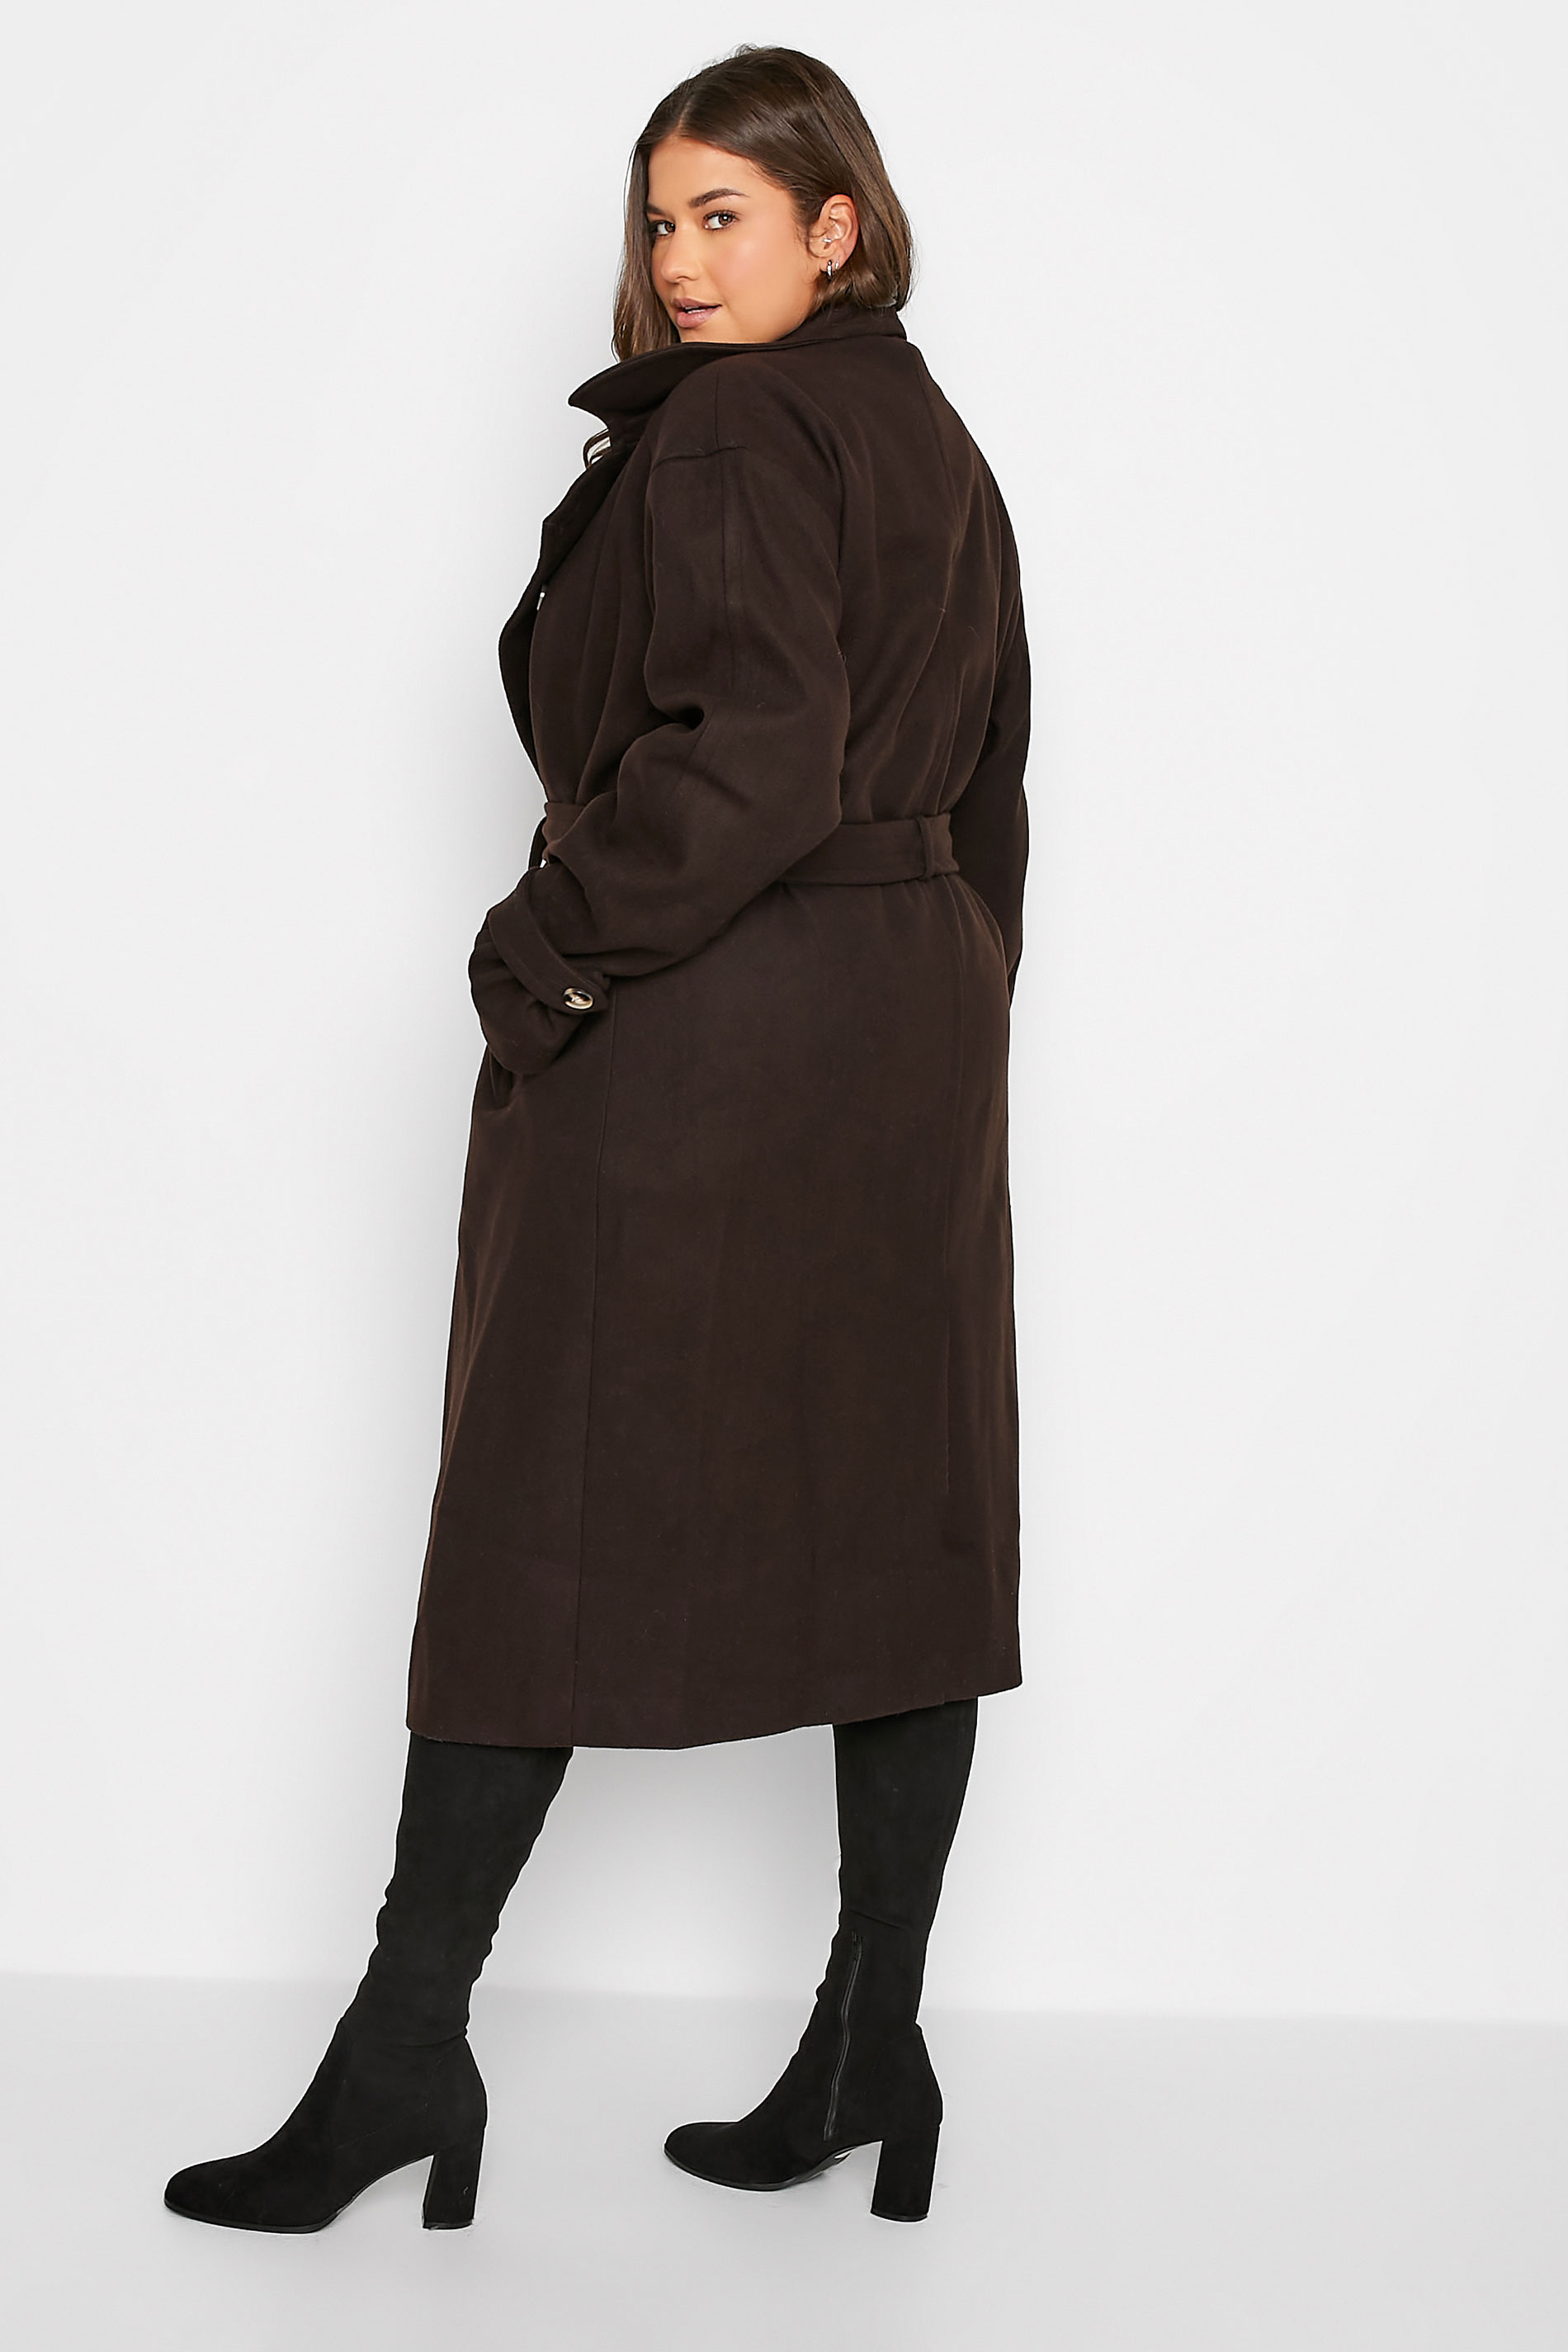 LTS Tall Womens Chocolate Brown Formal Trench Coat | Long Tall Sally 3